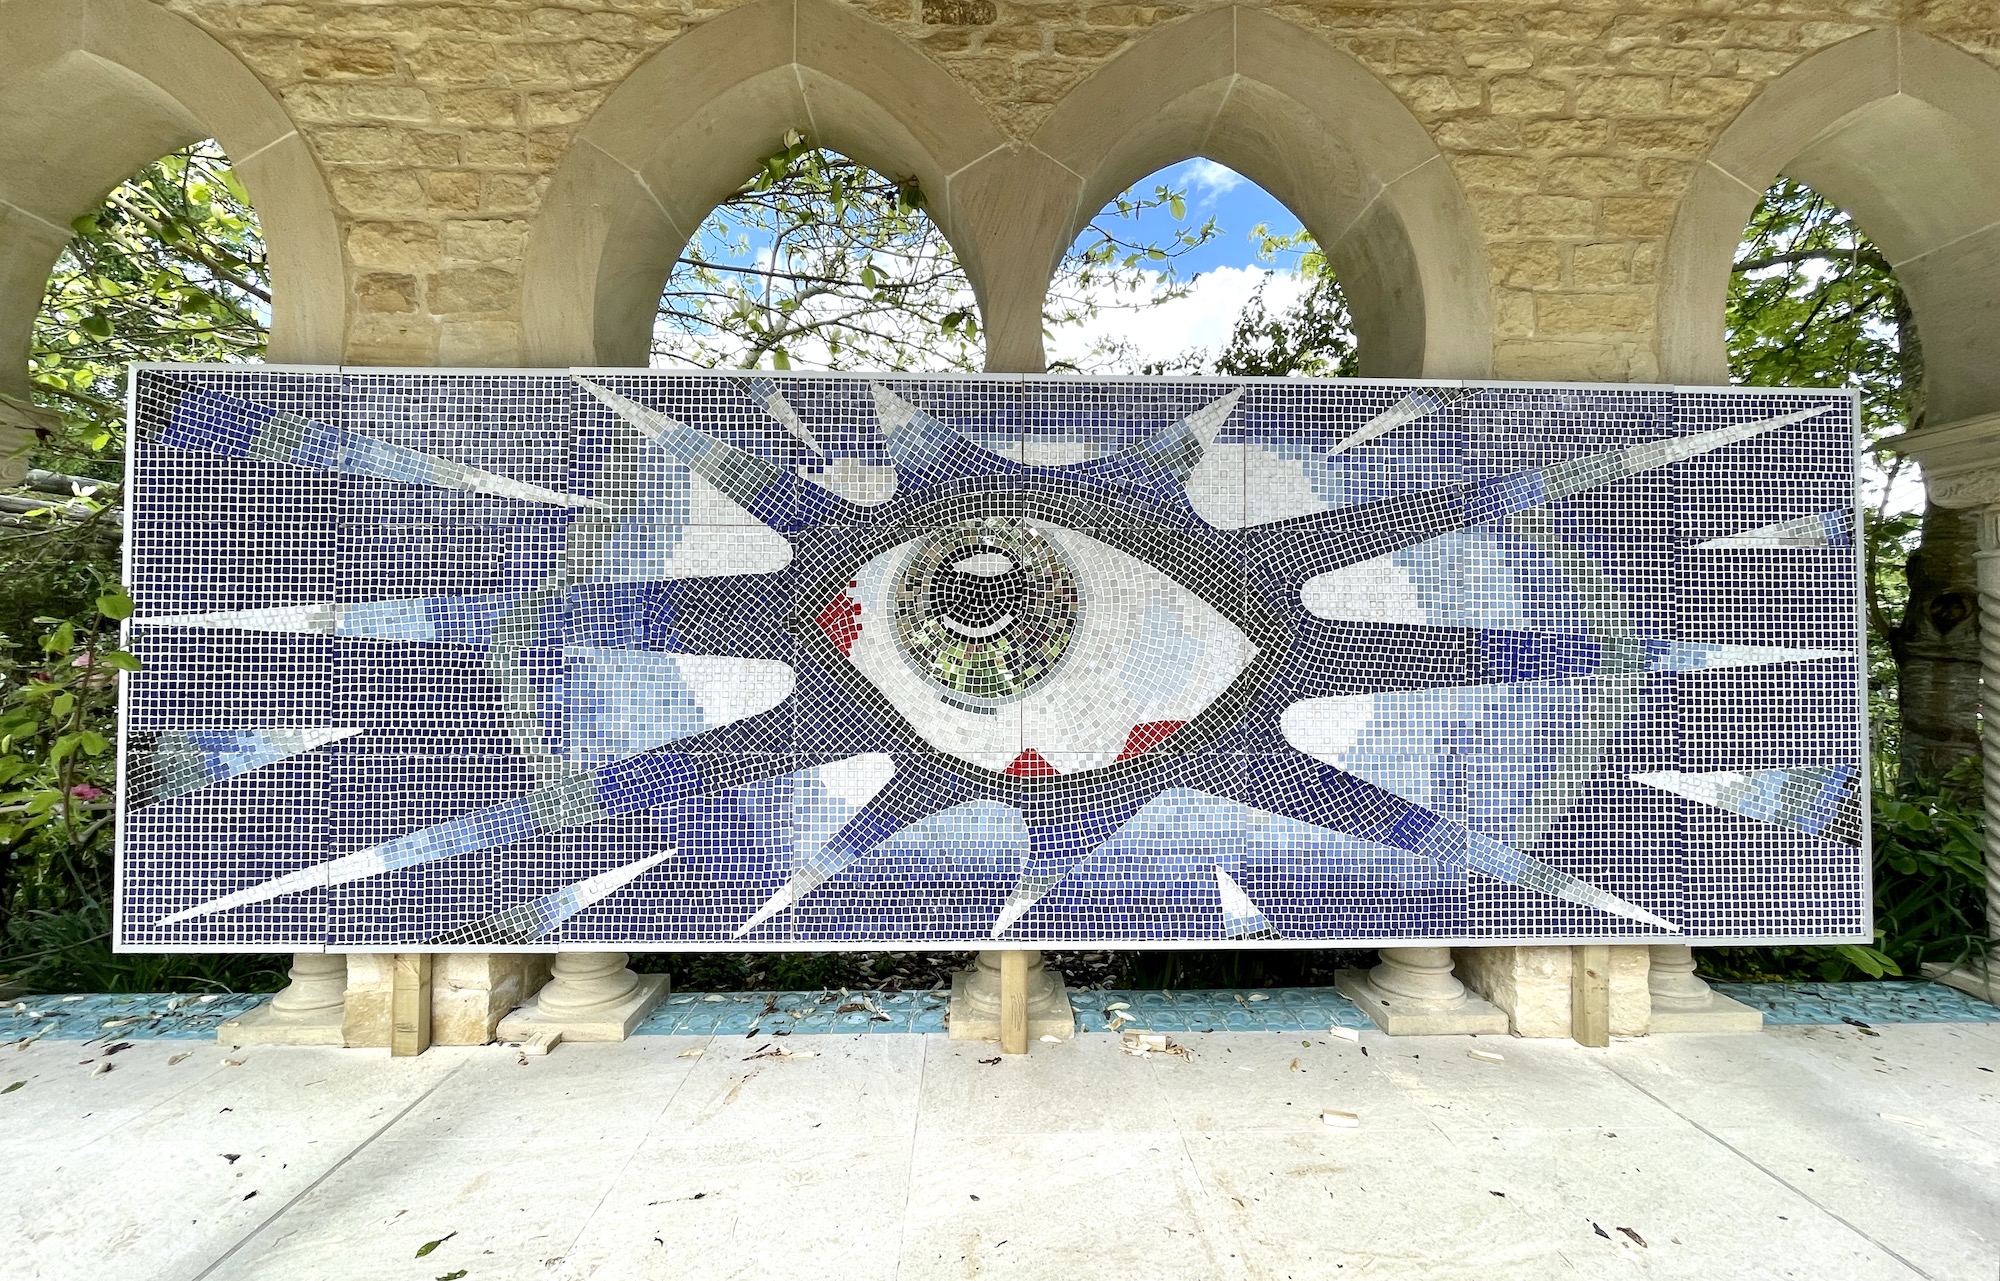 The 'Psychedelic Eye' Mosaic Commissioned By John Lennon For His Swimming Pool At His Kenwood Home